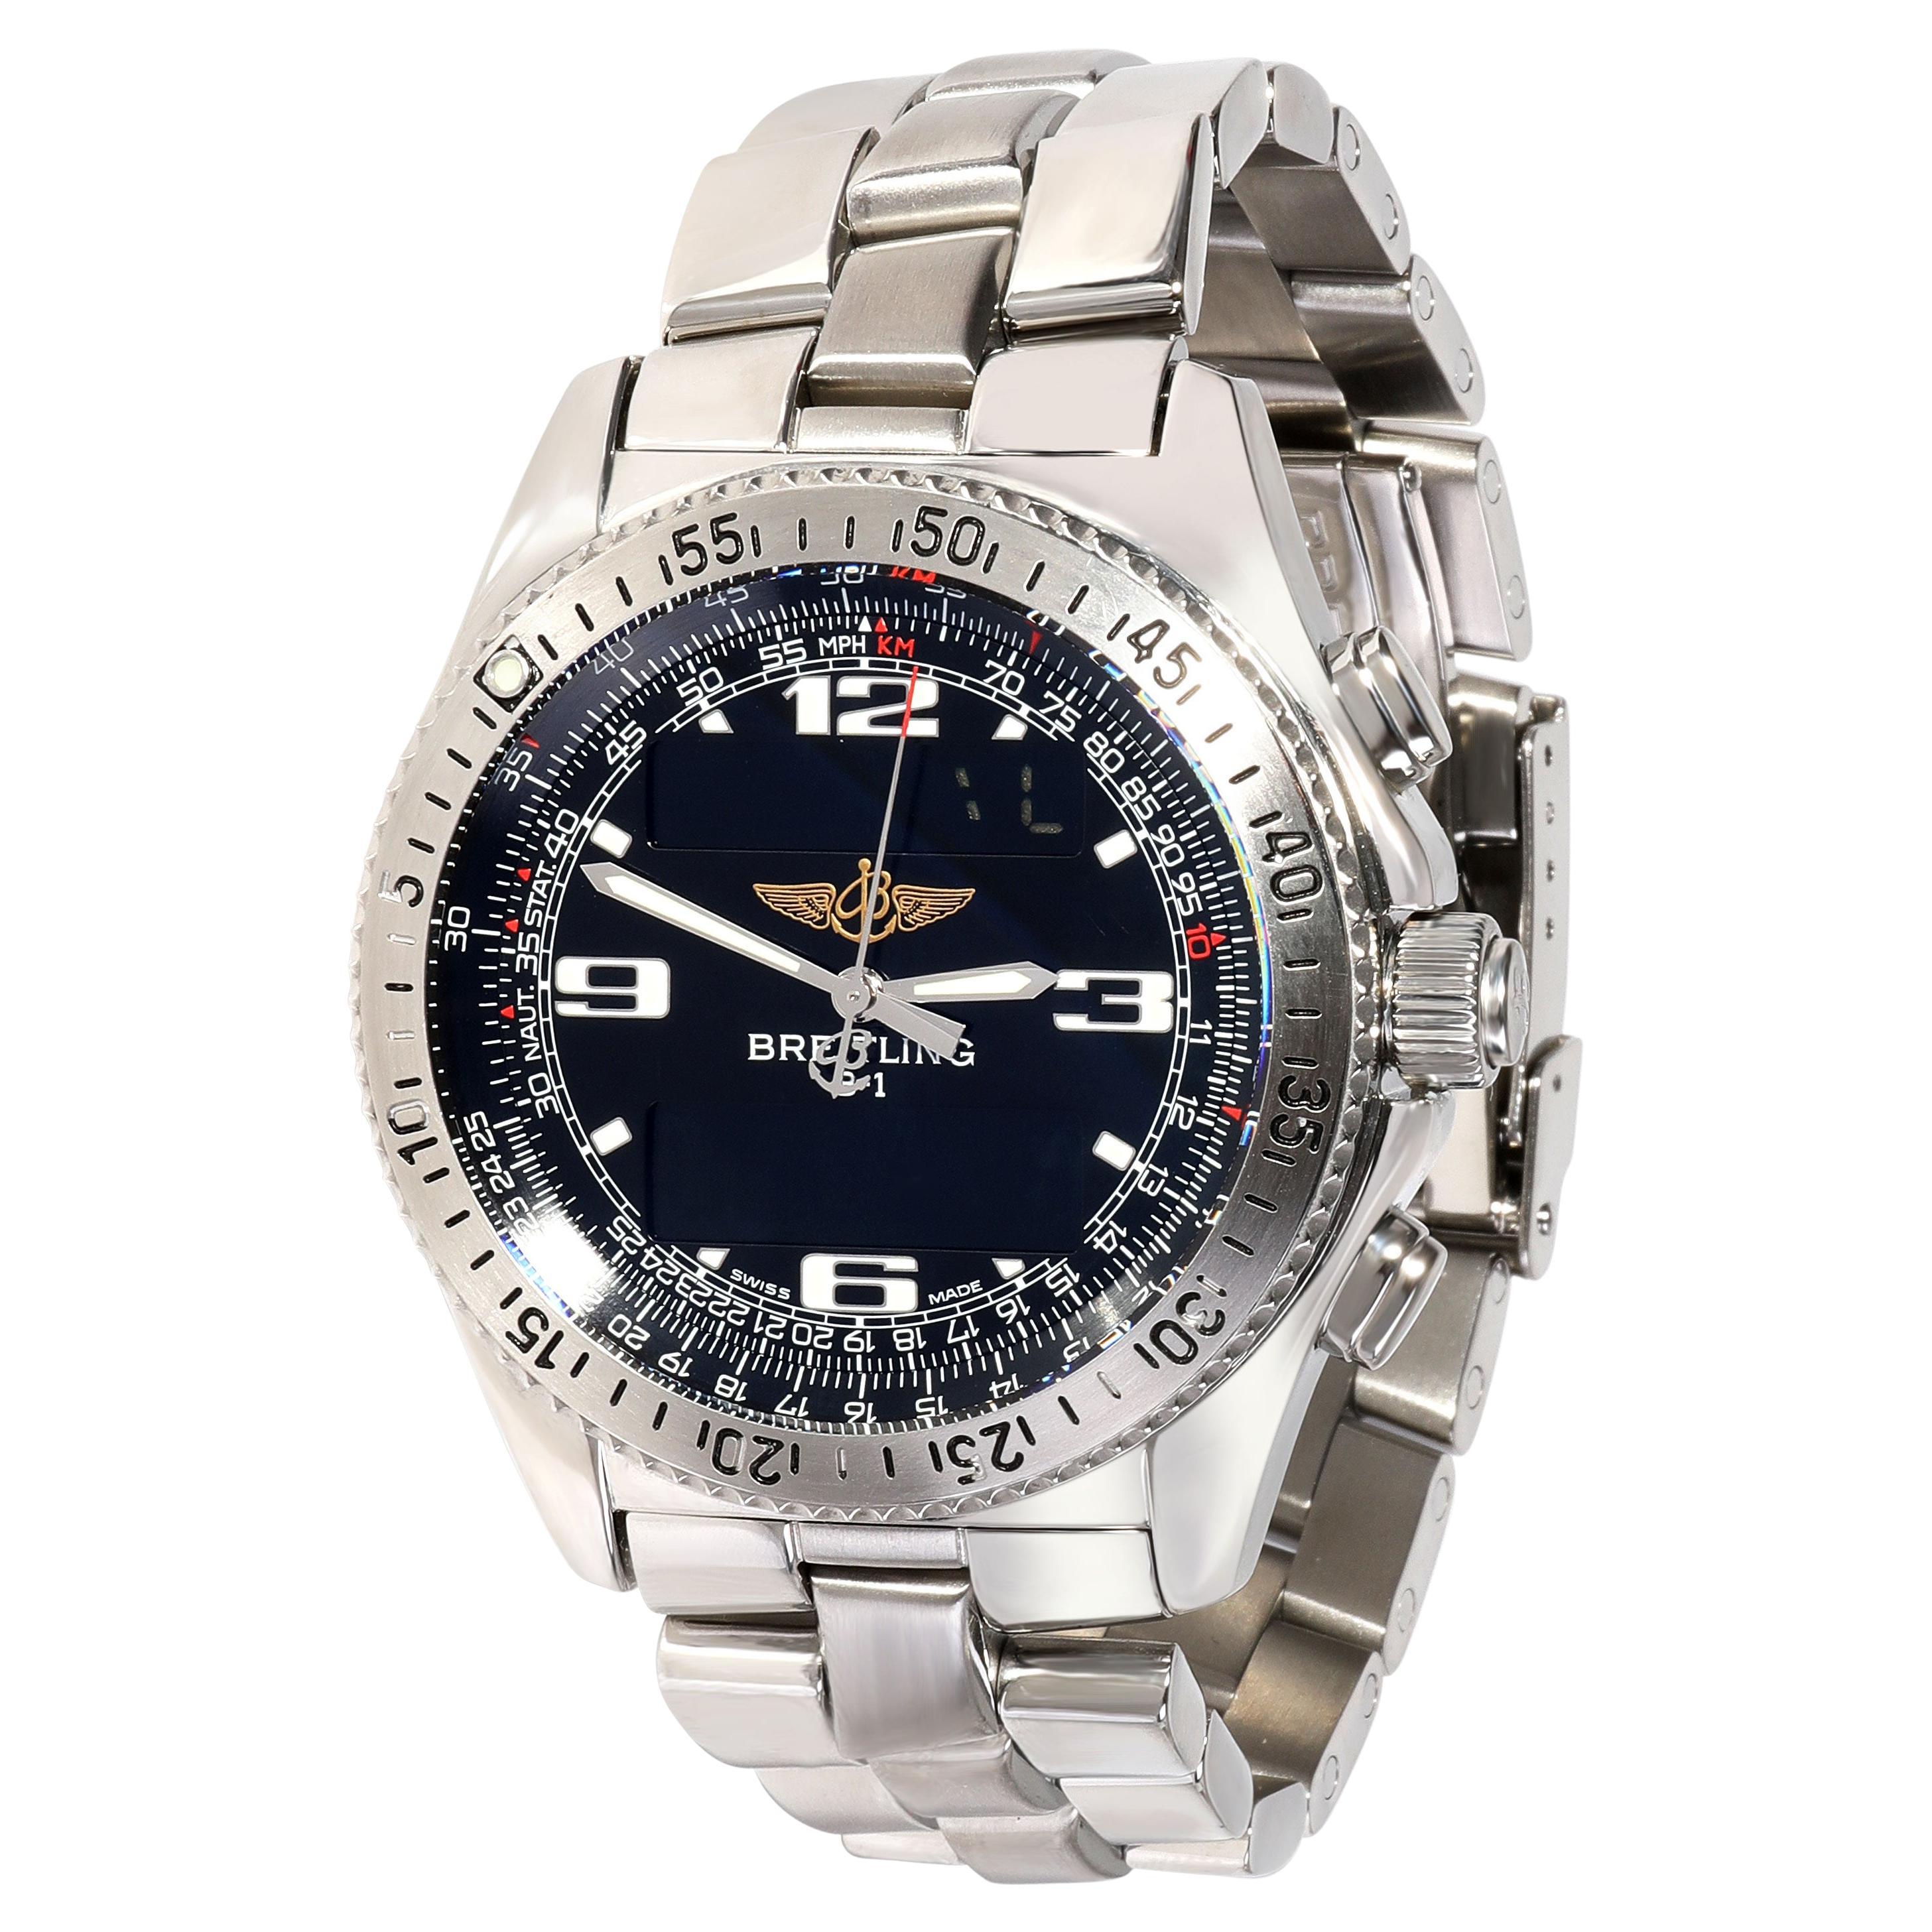 Breitling Professional B-1 A68362 Men's Watch in Stainless Steel